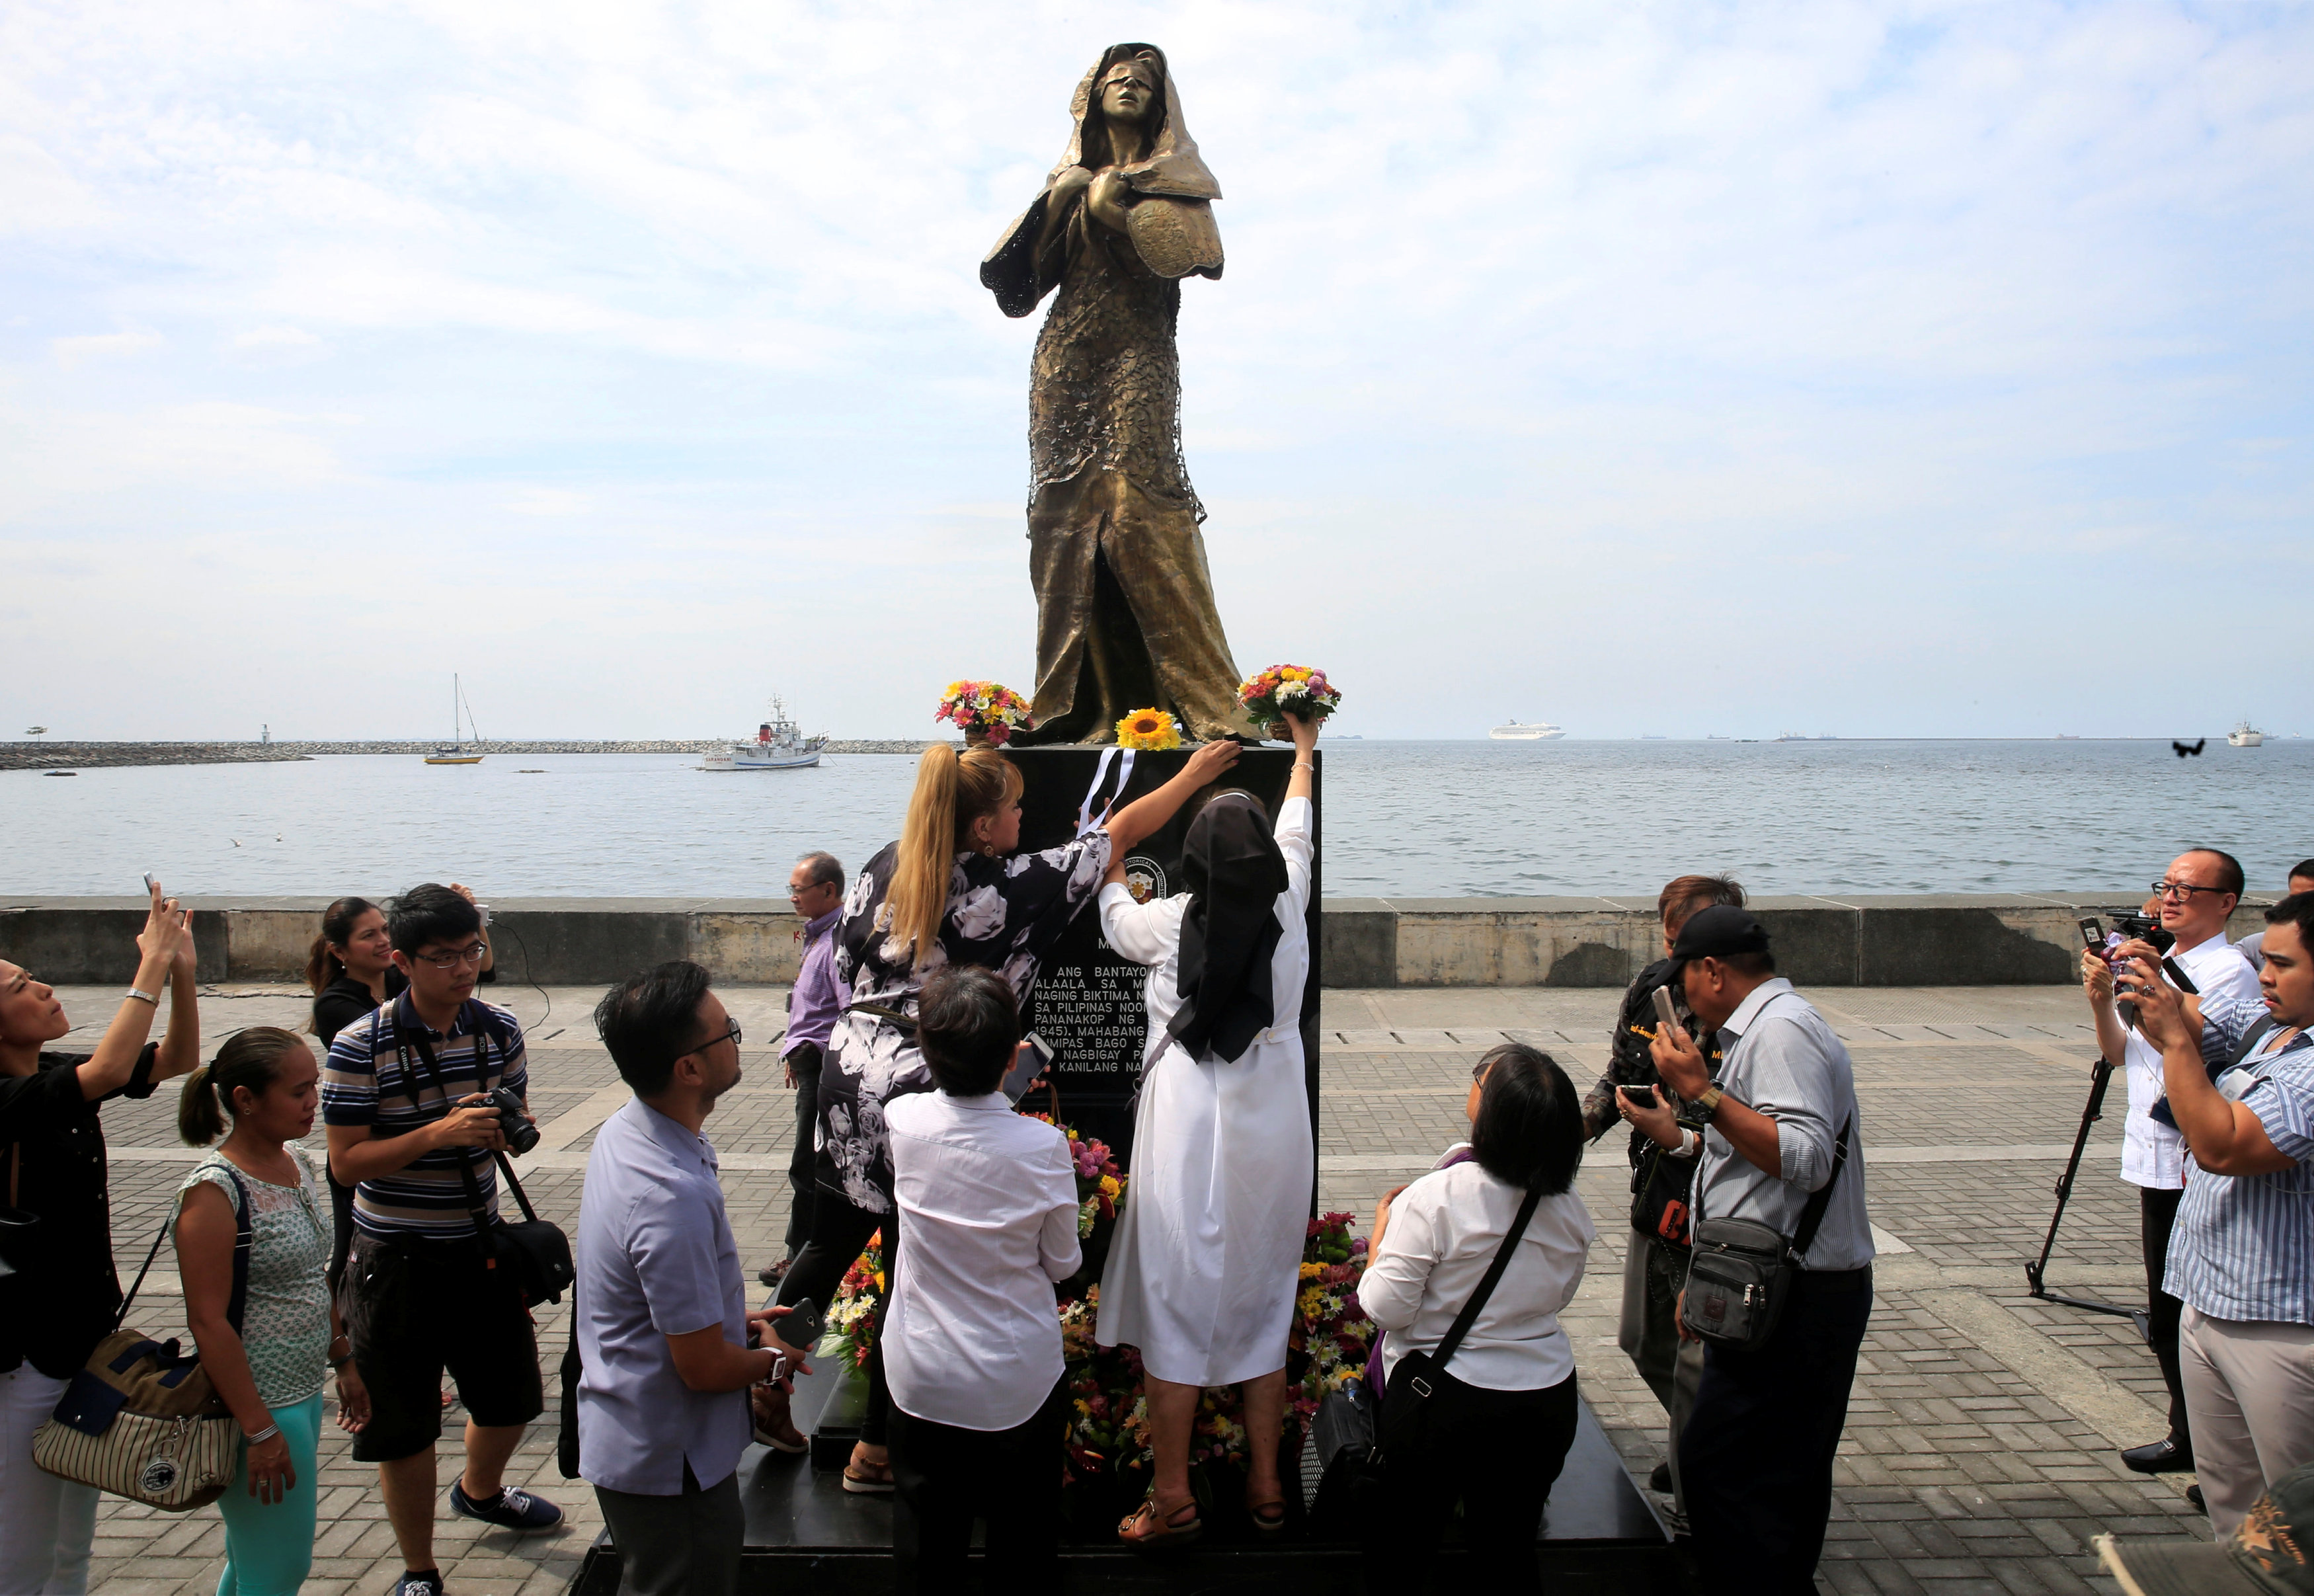 Religious group and non-government organizations offer flowers at a memorial statue that commemorates the Filipino 